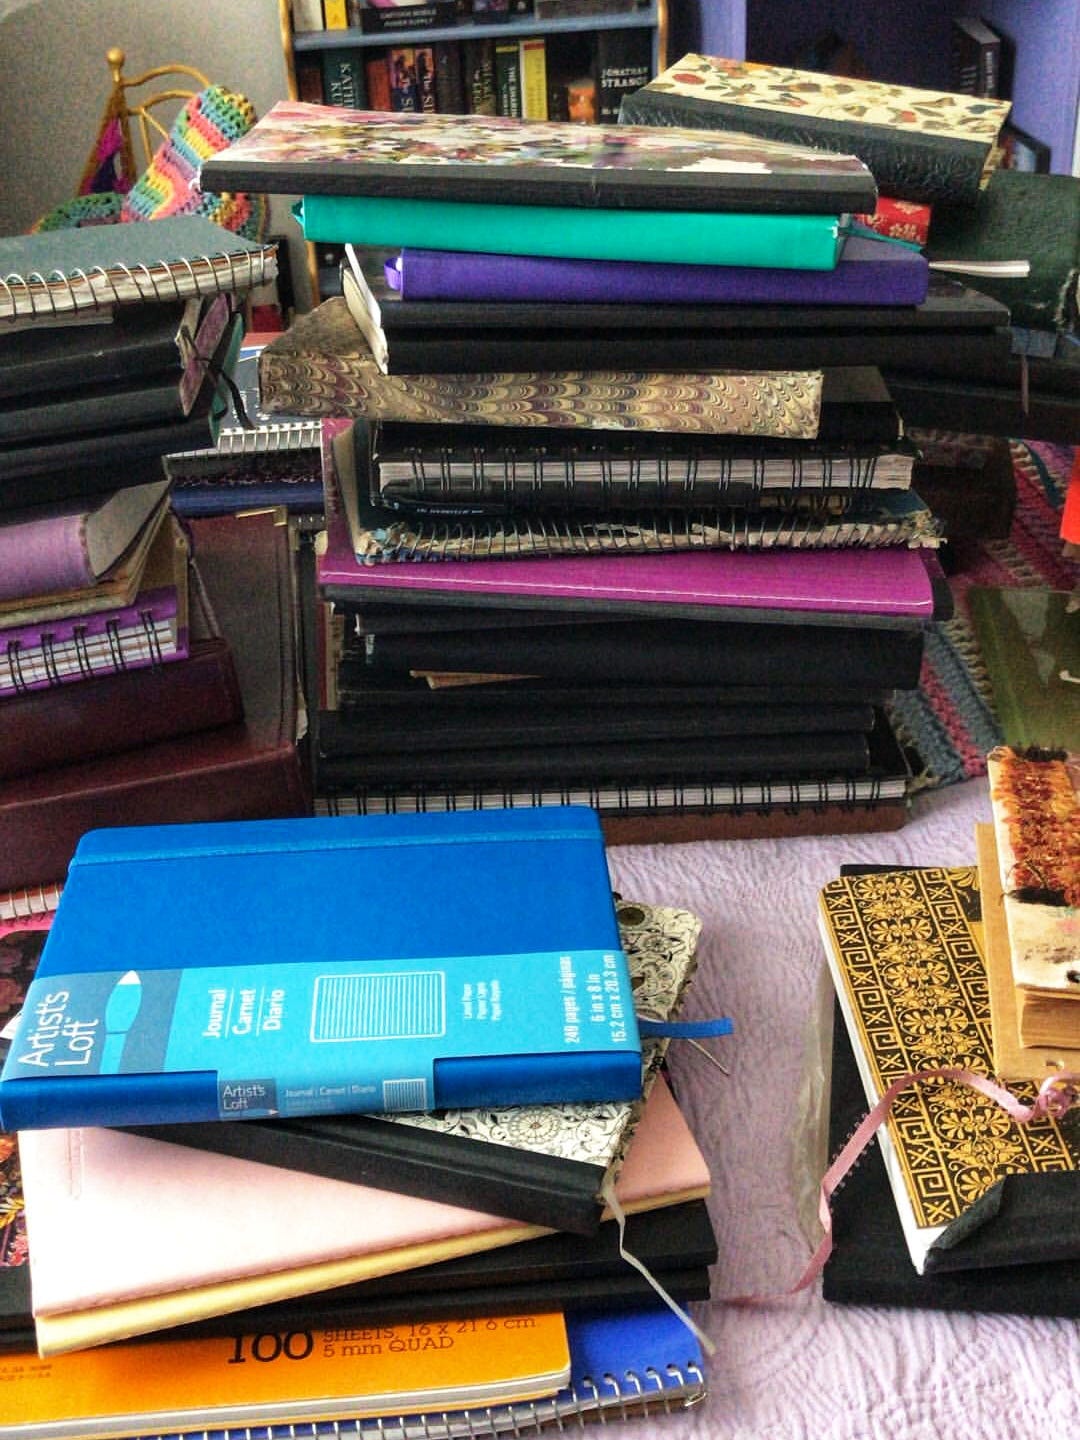 Maybe about 50 blank books and notebooks in several piles on a bed